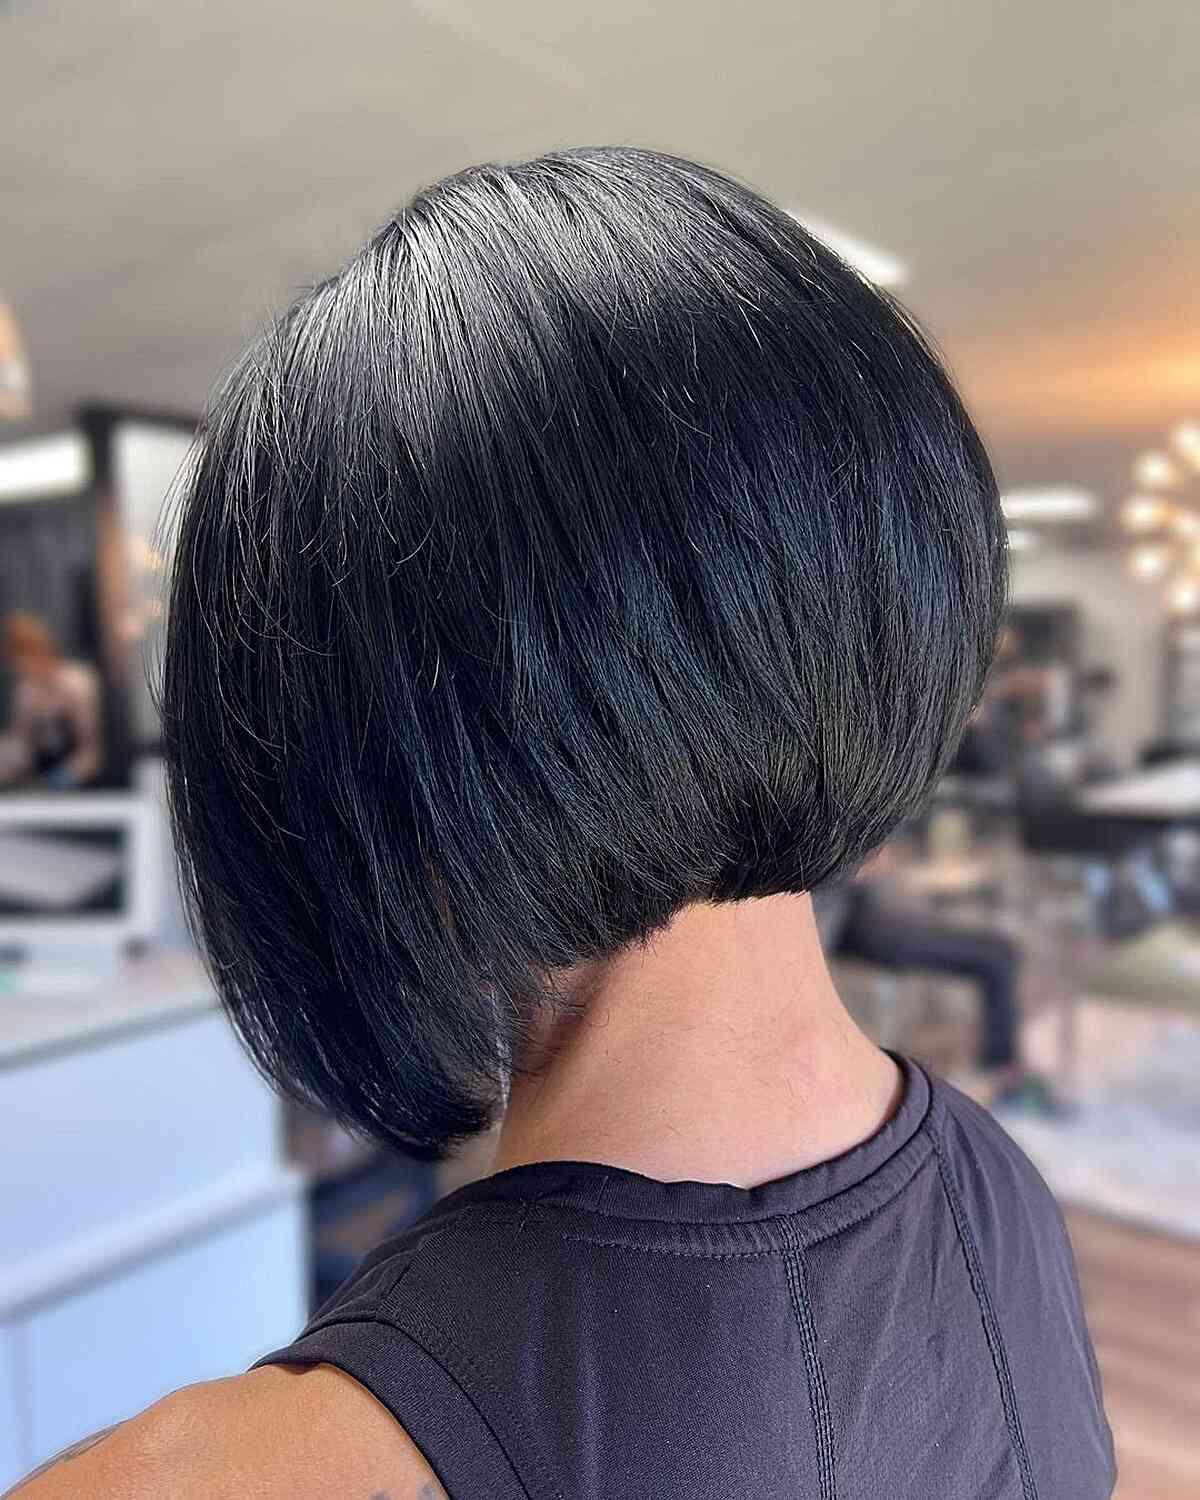 The Most Perfect A-Line Bob for women with jet black tresses